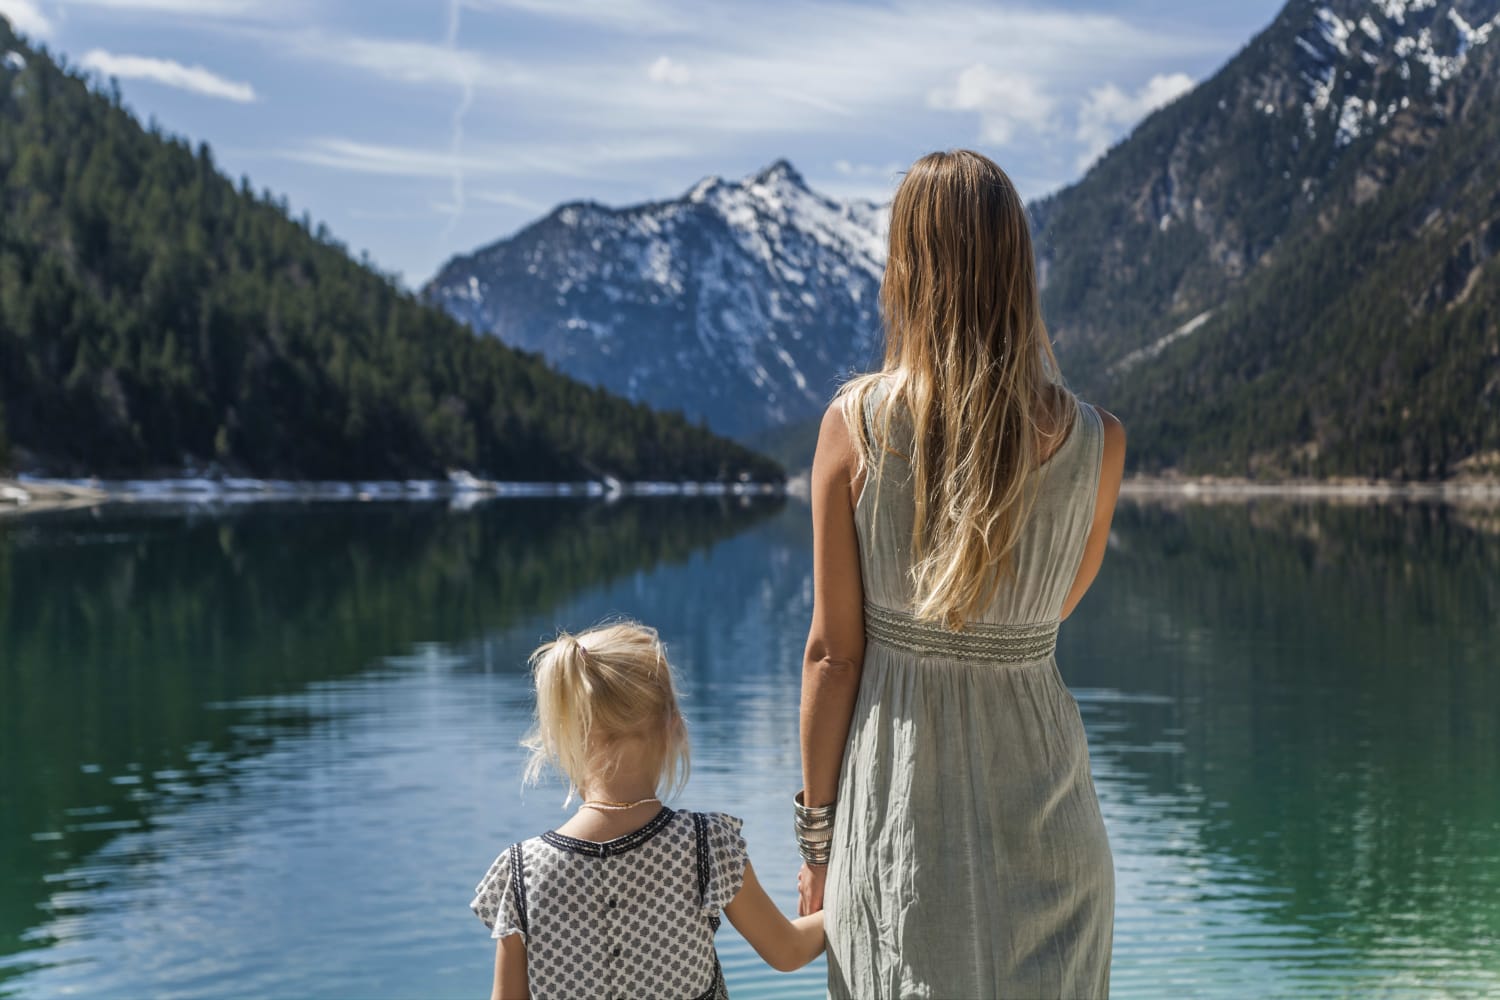 A therapist shares the 7 biggest parenting mistakes that destroy kids' mental strength